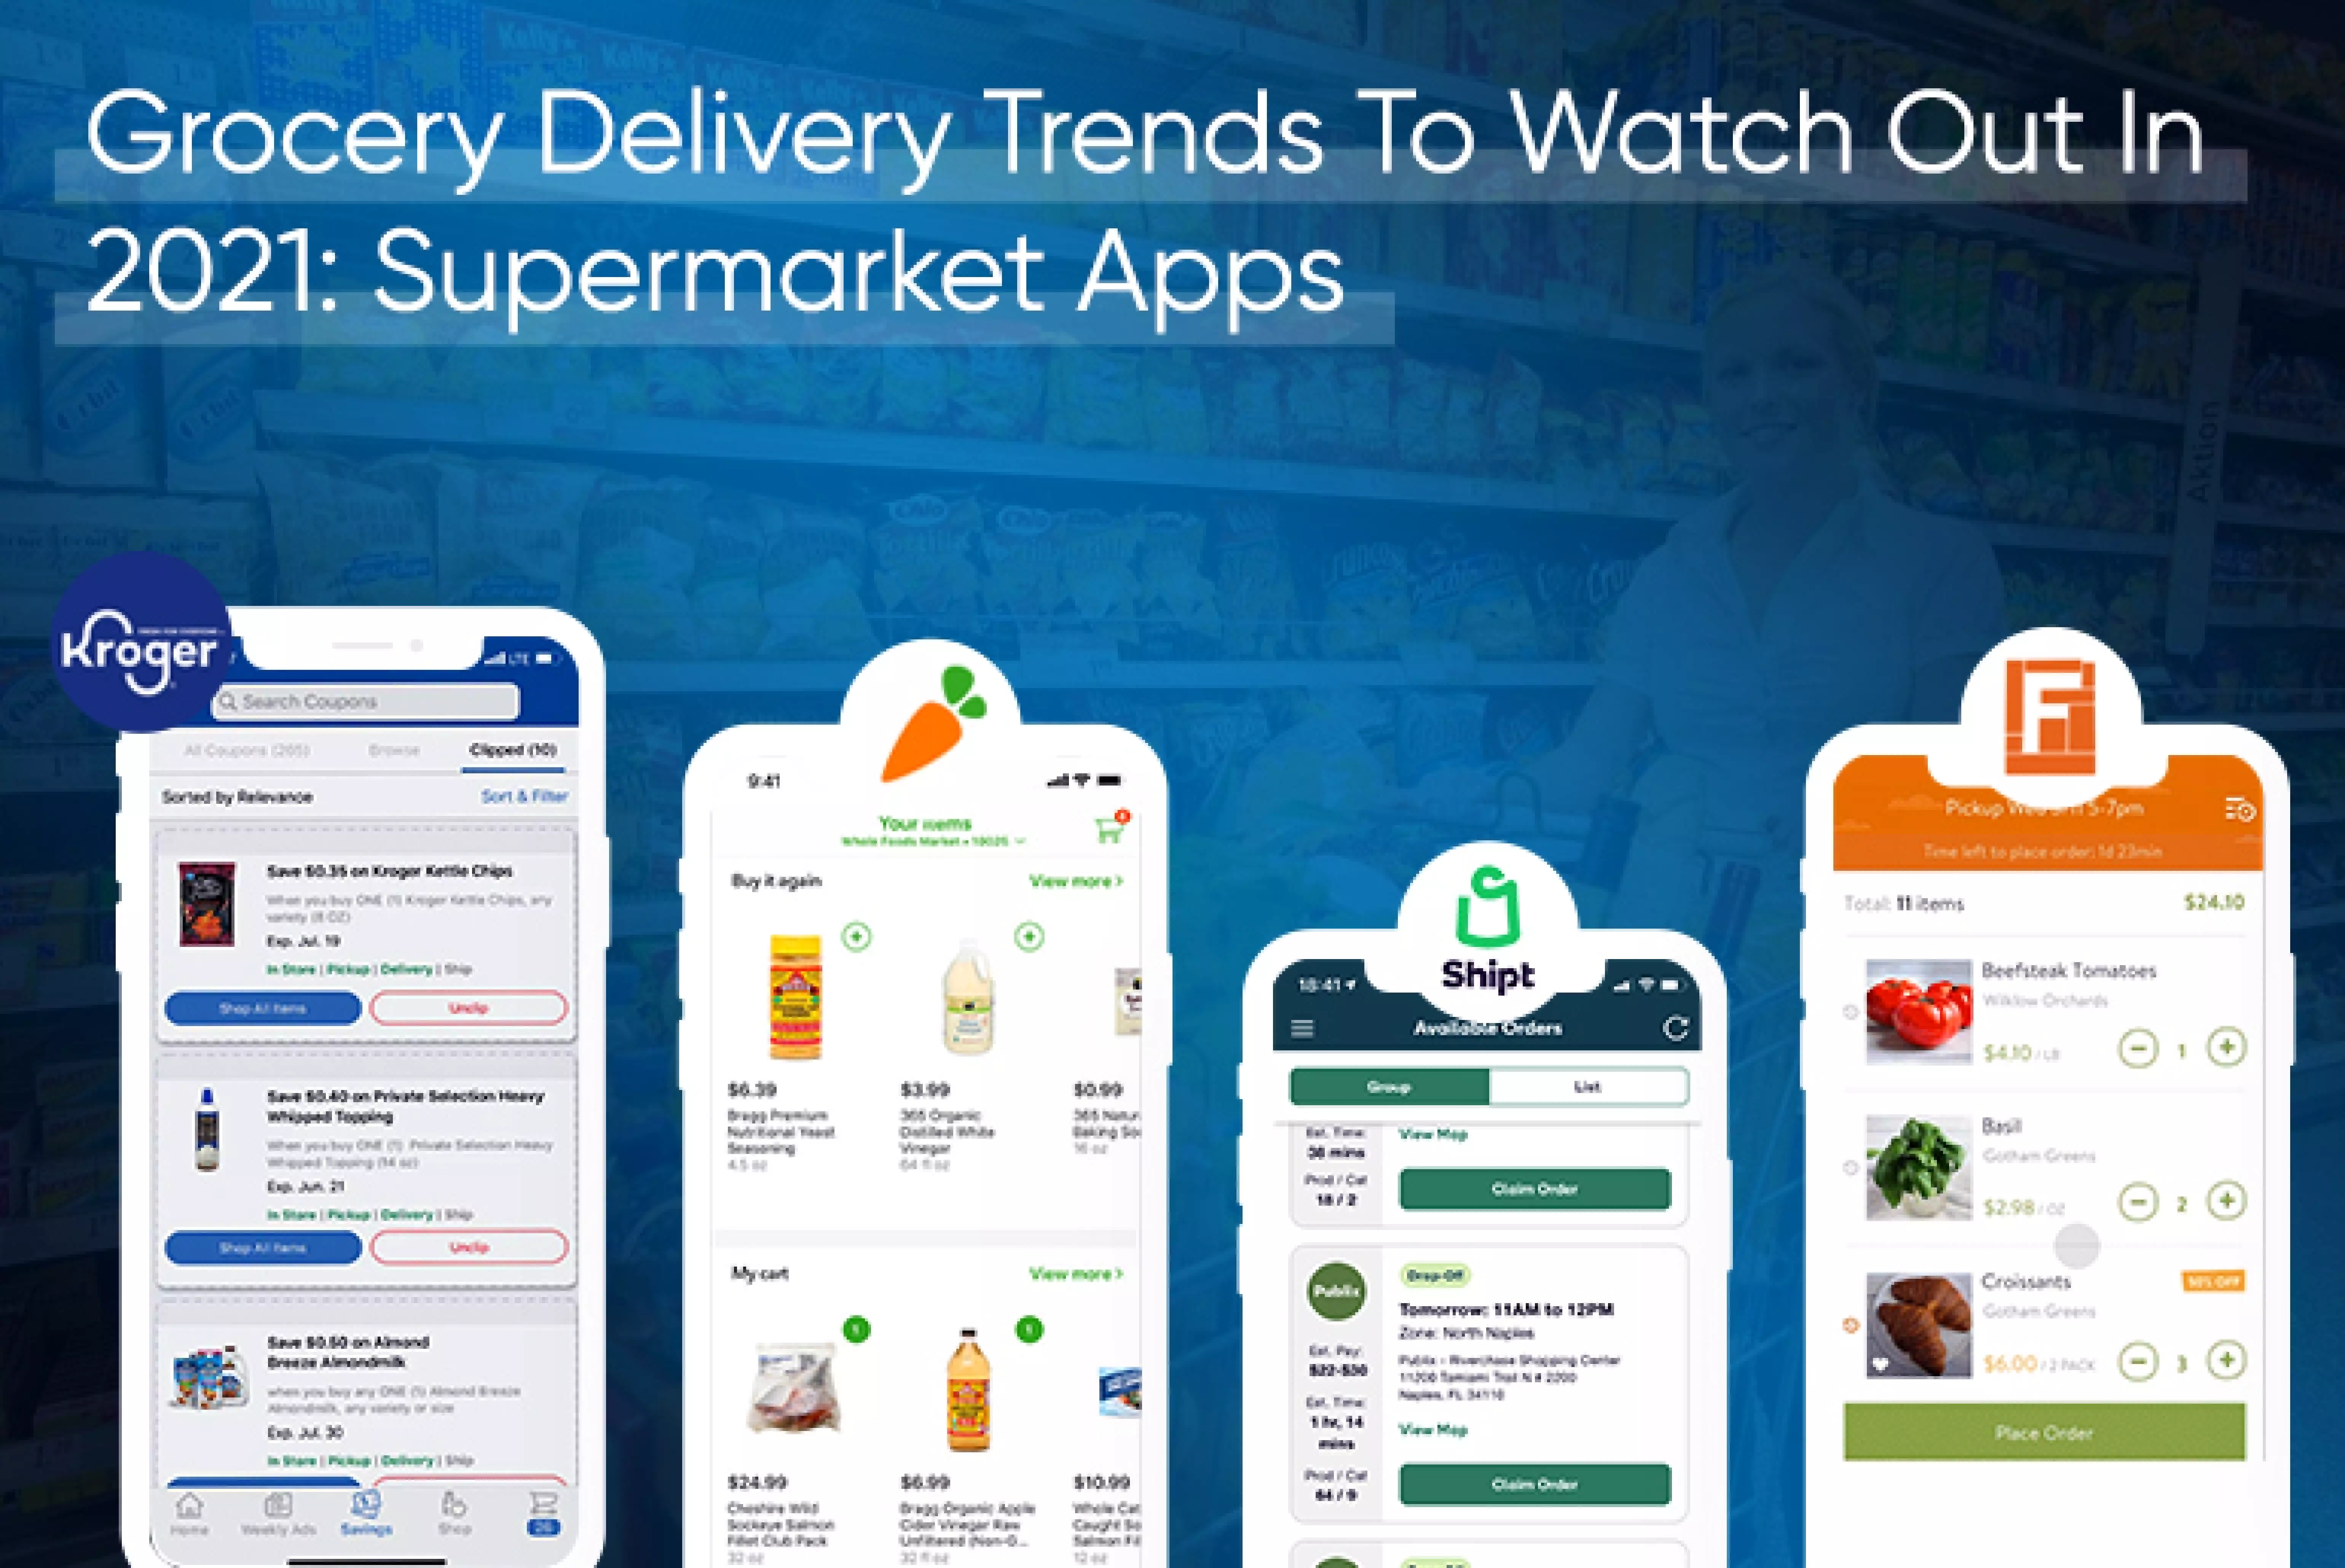 Grocery Delivery Trends To Watch Out In 2021 Supermarket Apps_Thum